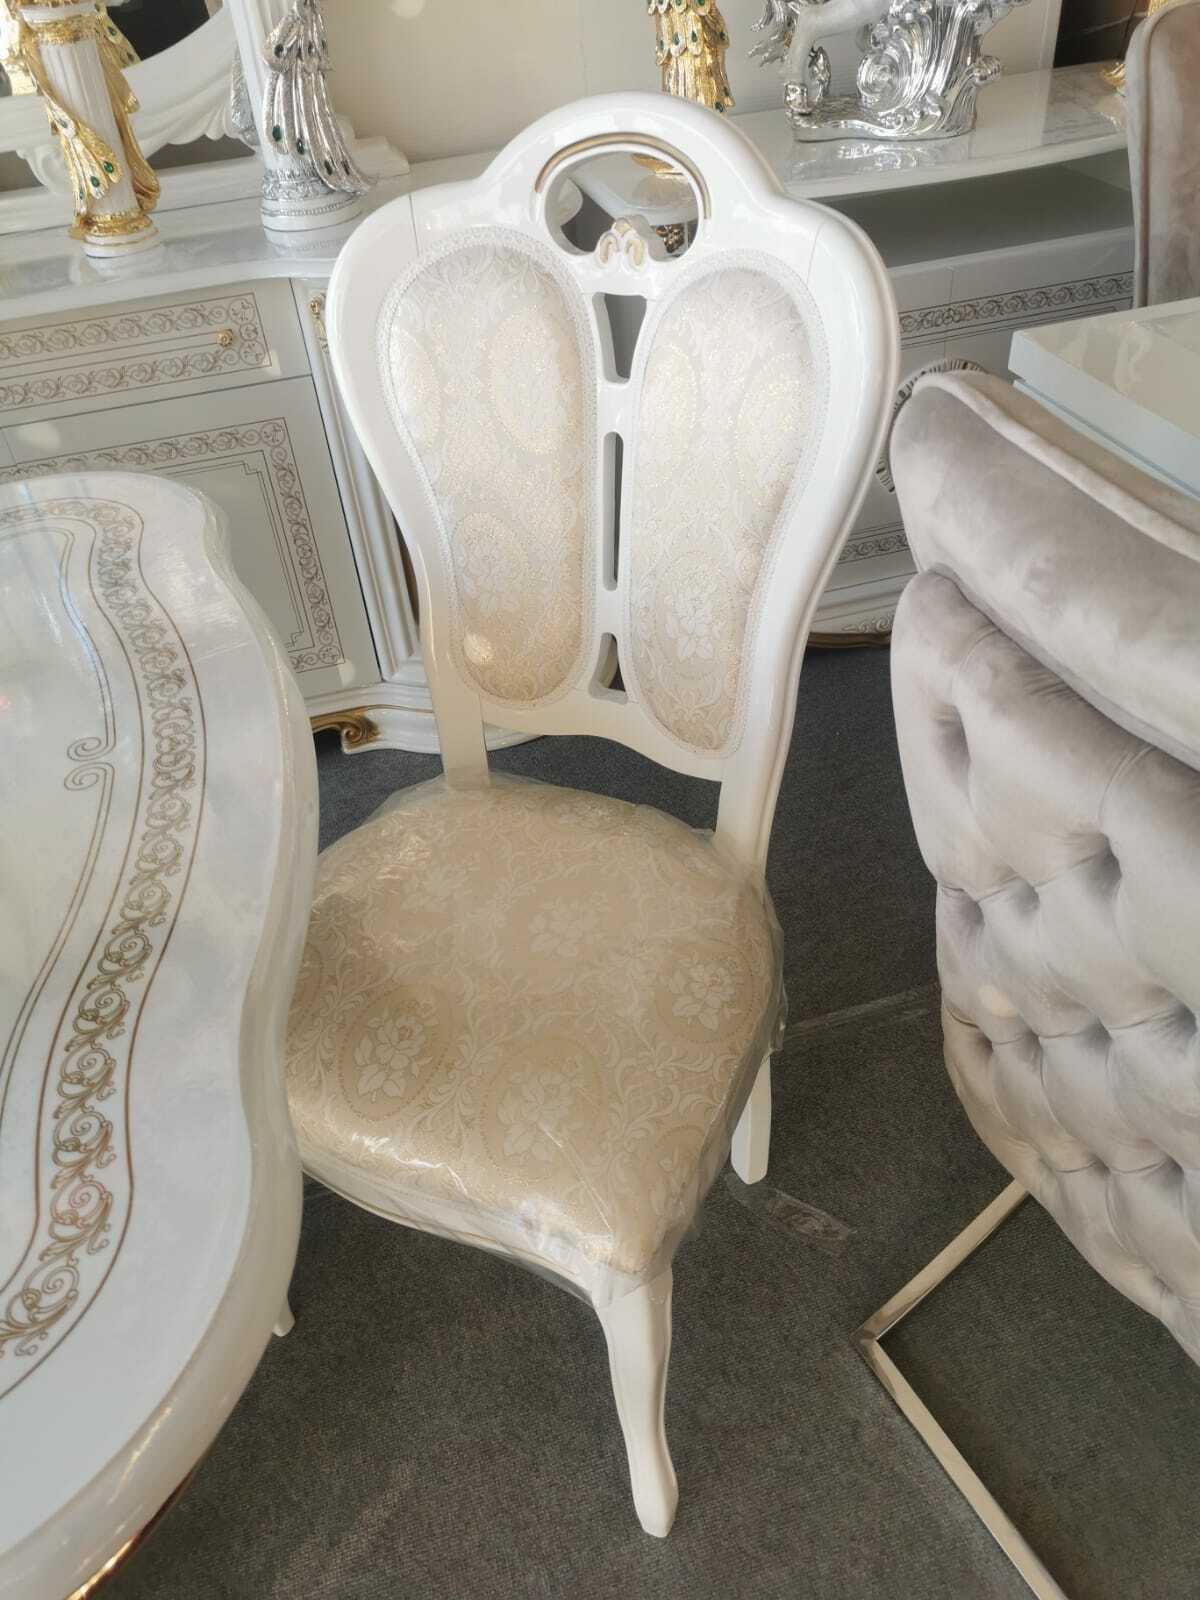 Living/dining room luxury rococo style gloss 1x-chair with soft seat, italian furniture